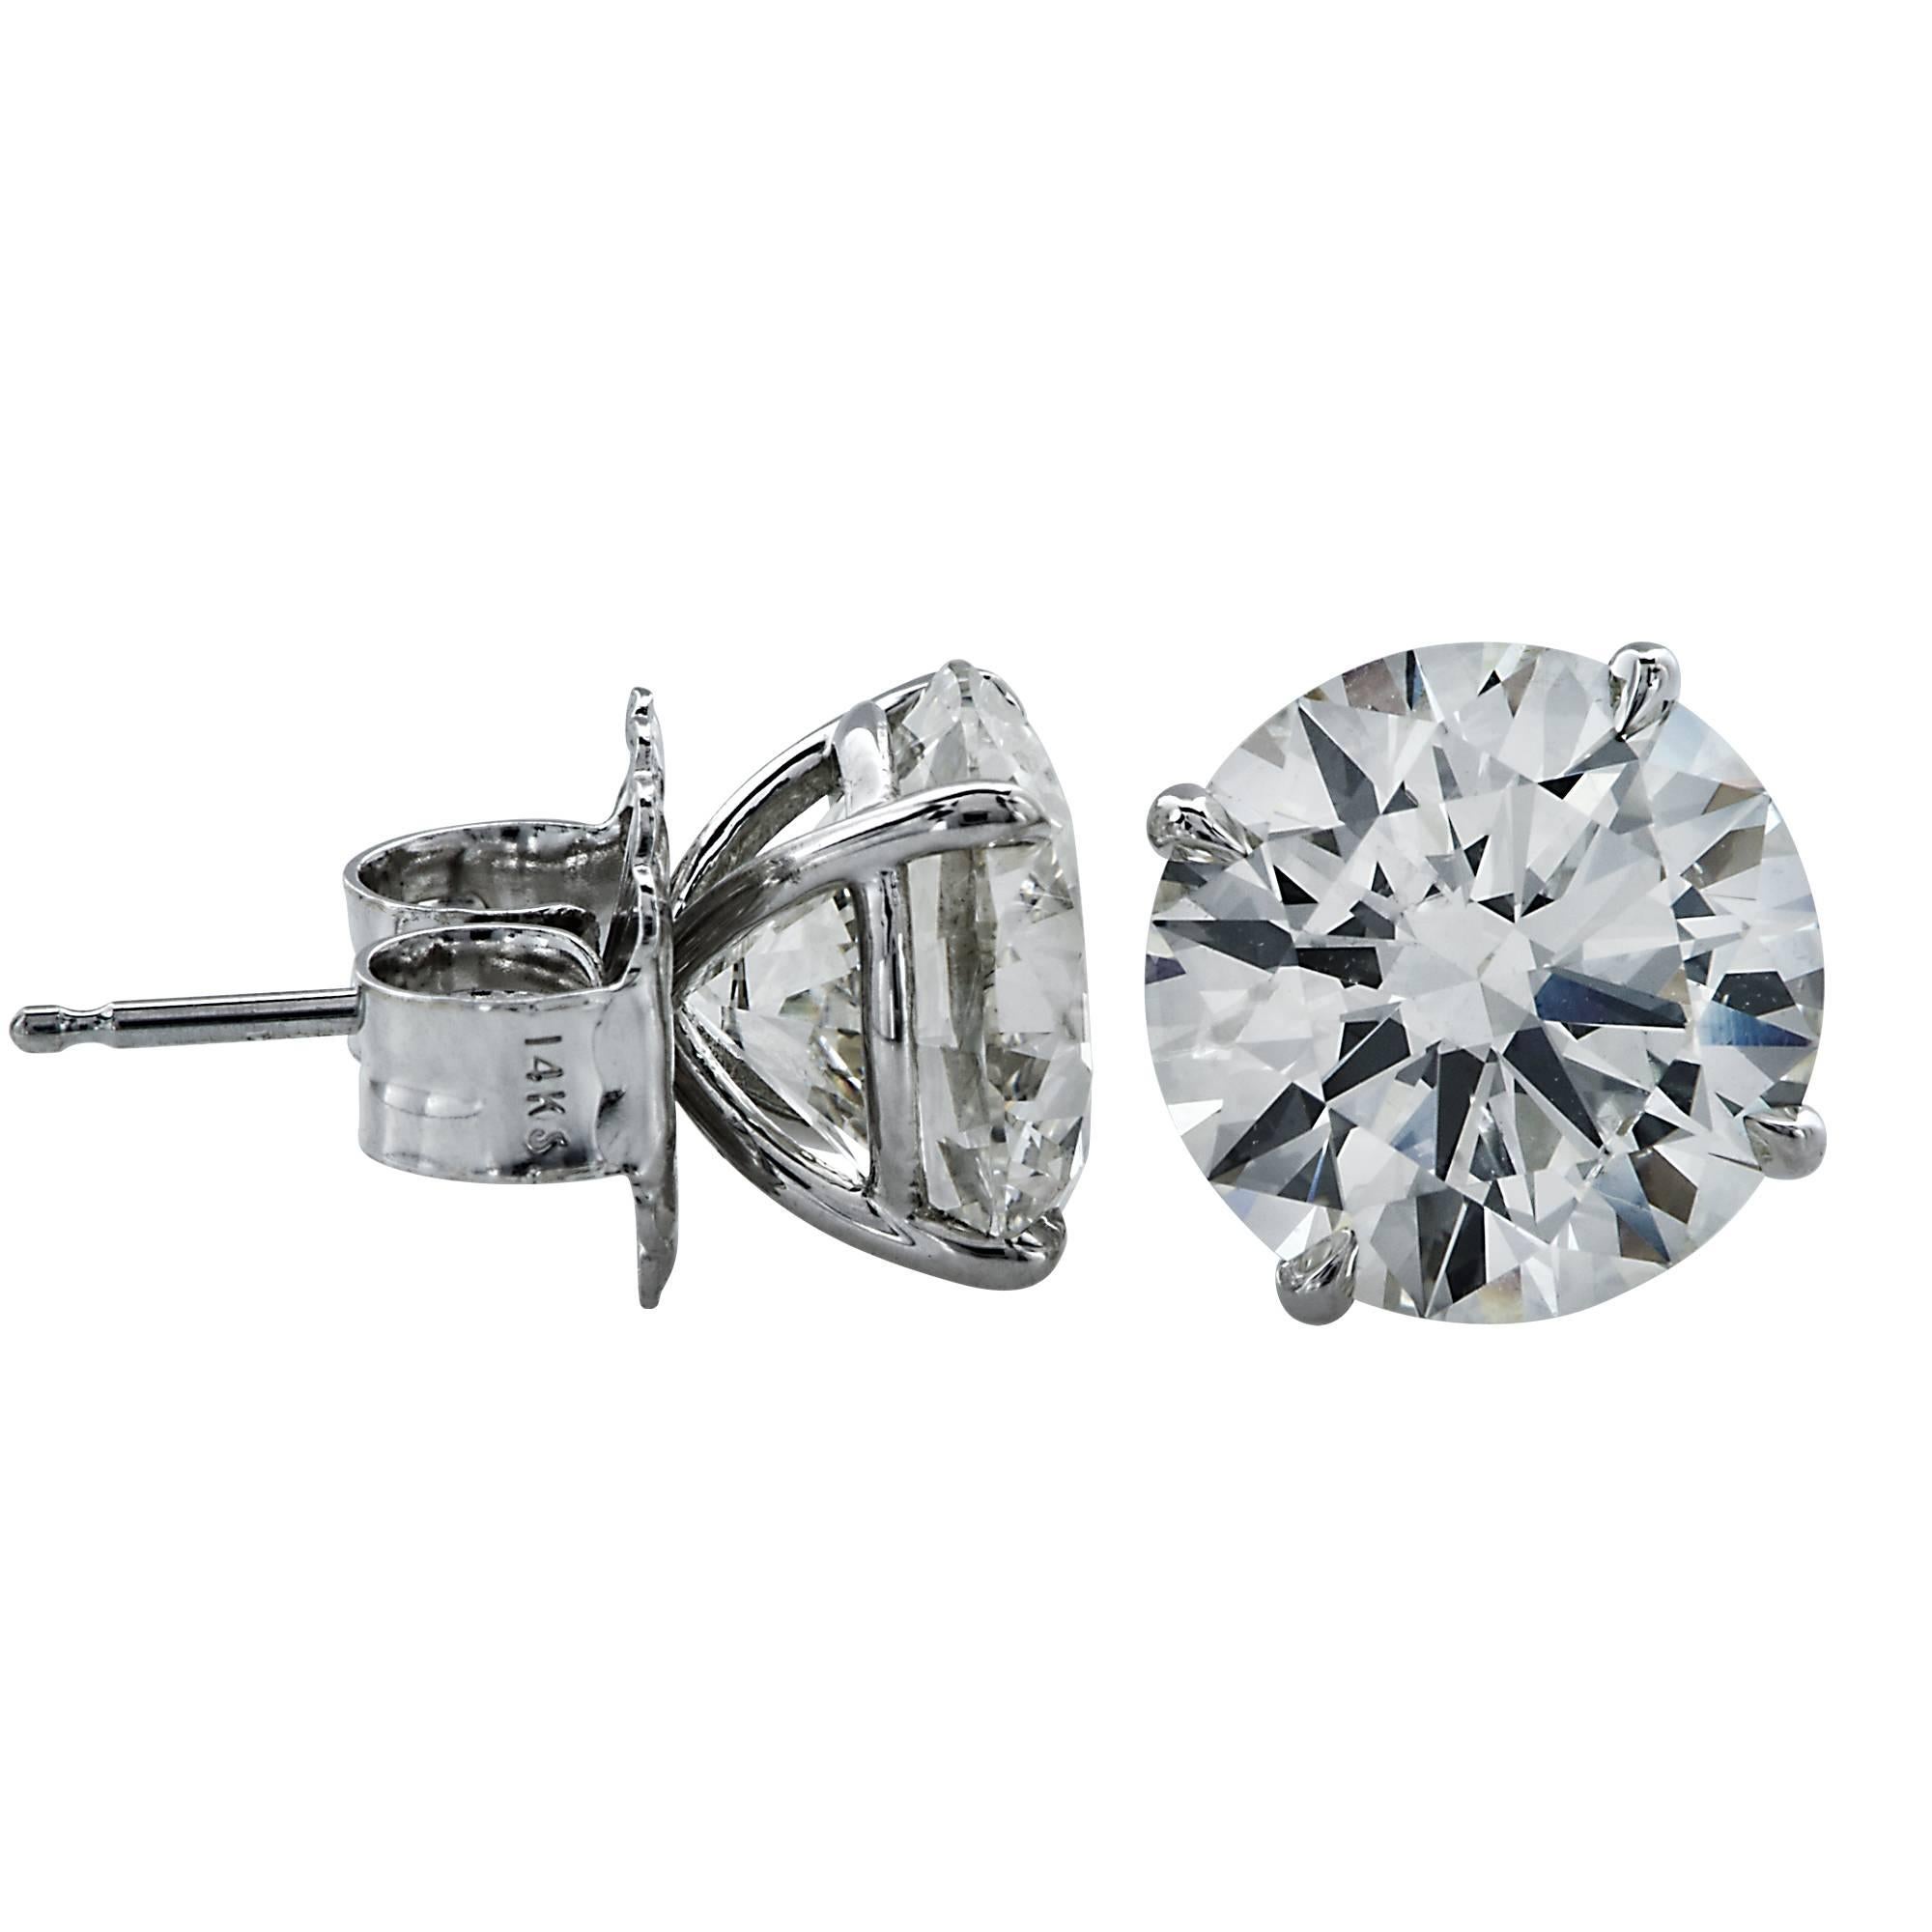 18k white gold earrings containing two GIA graded round brilliant cut diamonds with a combined total weight of 6.92ct L color and SI2 clarity.

The earrings are stamped and/or tested as 18k gold.

These diamond earrings are accompanied by two GIA